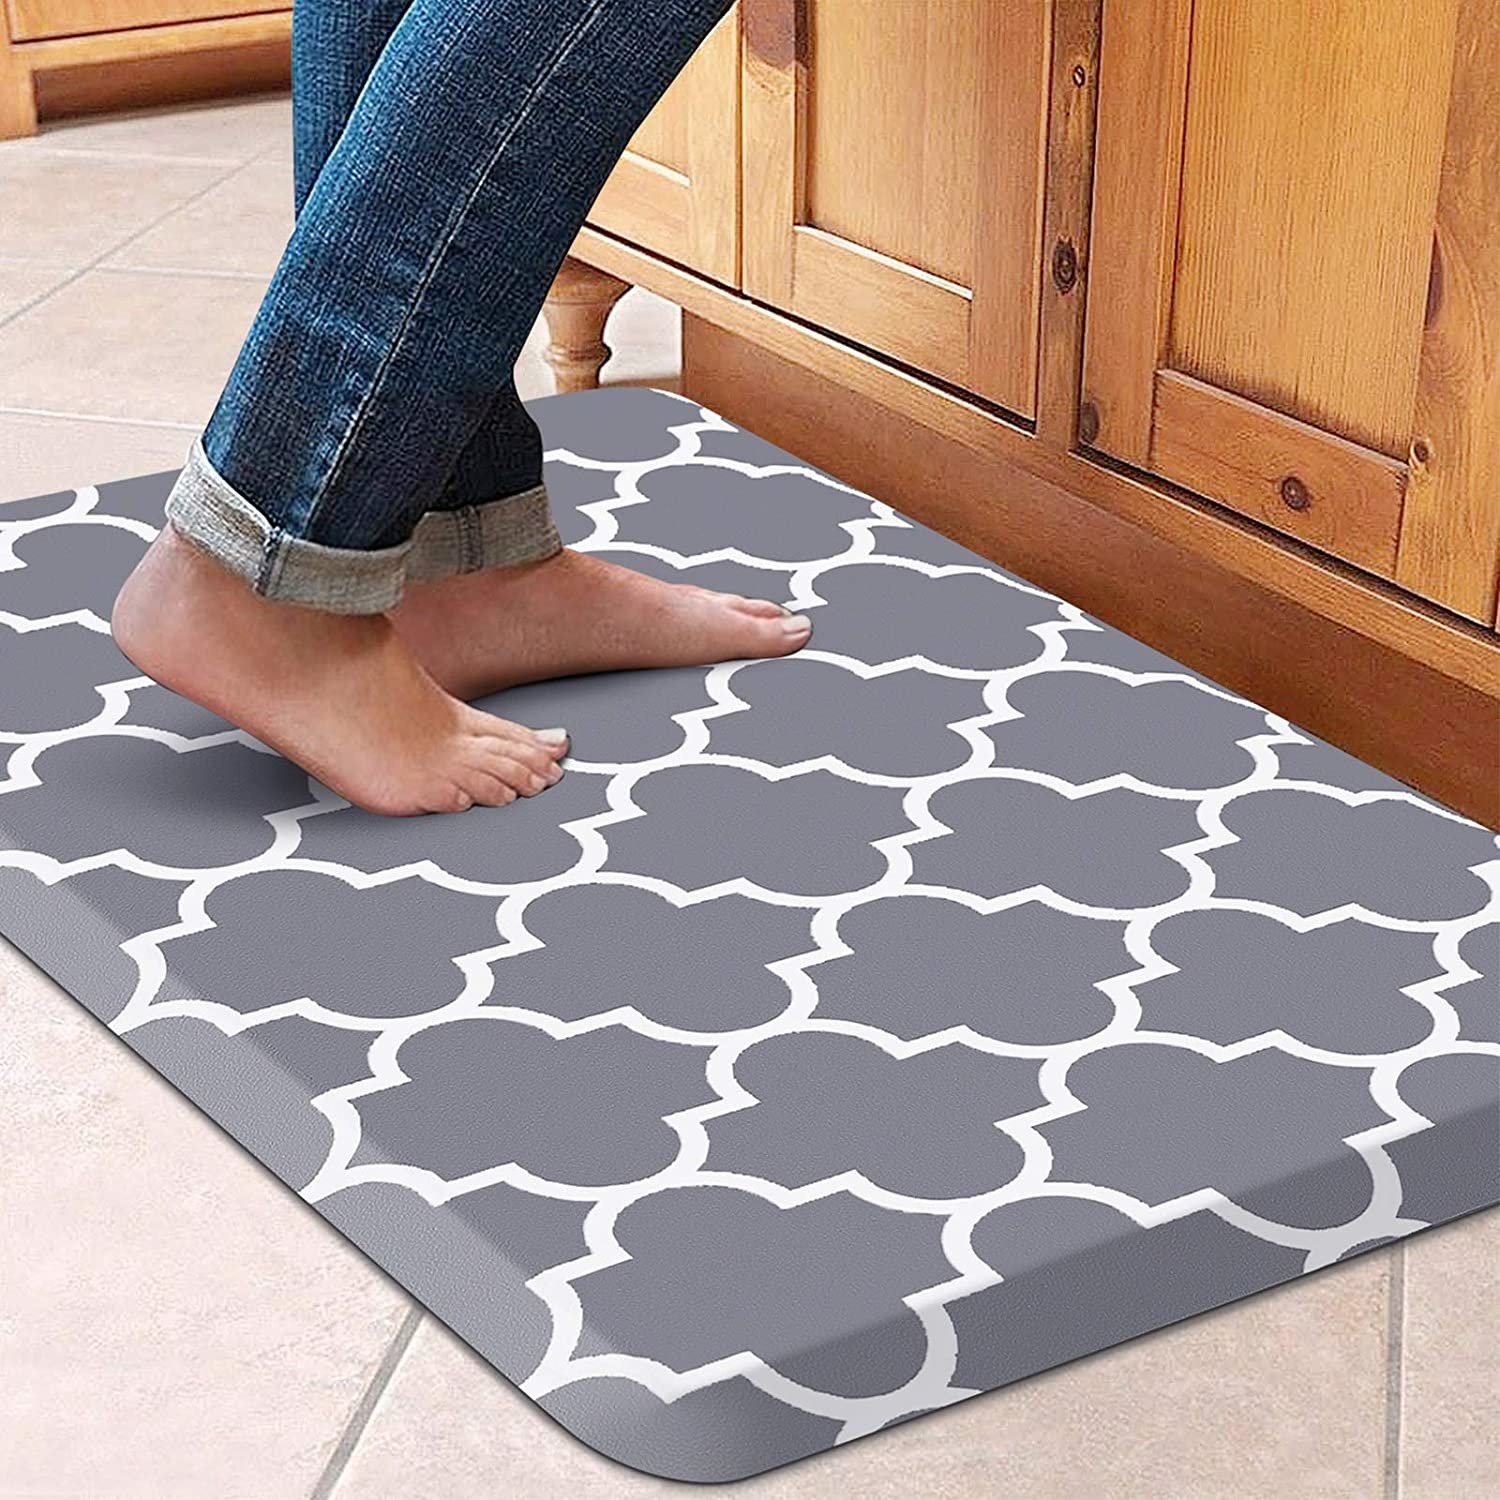 Model standing barefoot on the gray kitchen mat